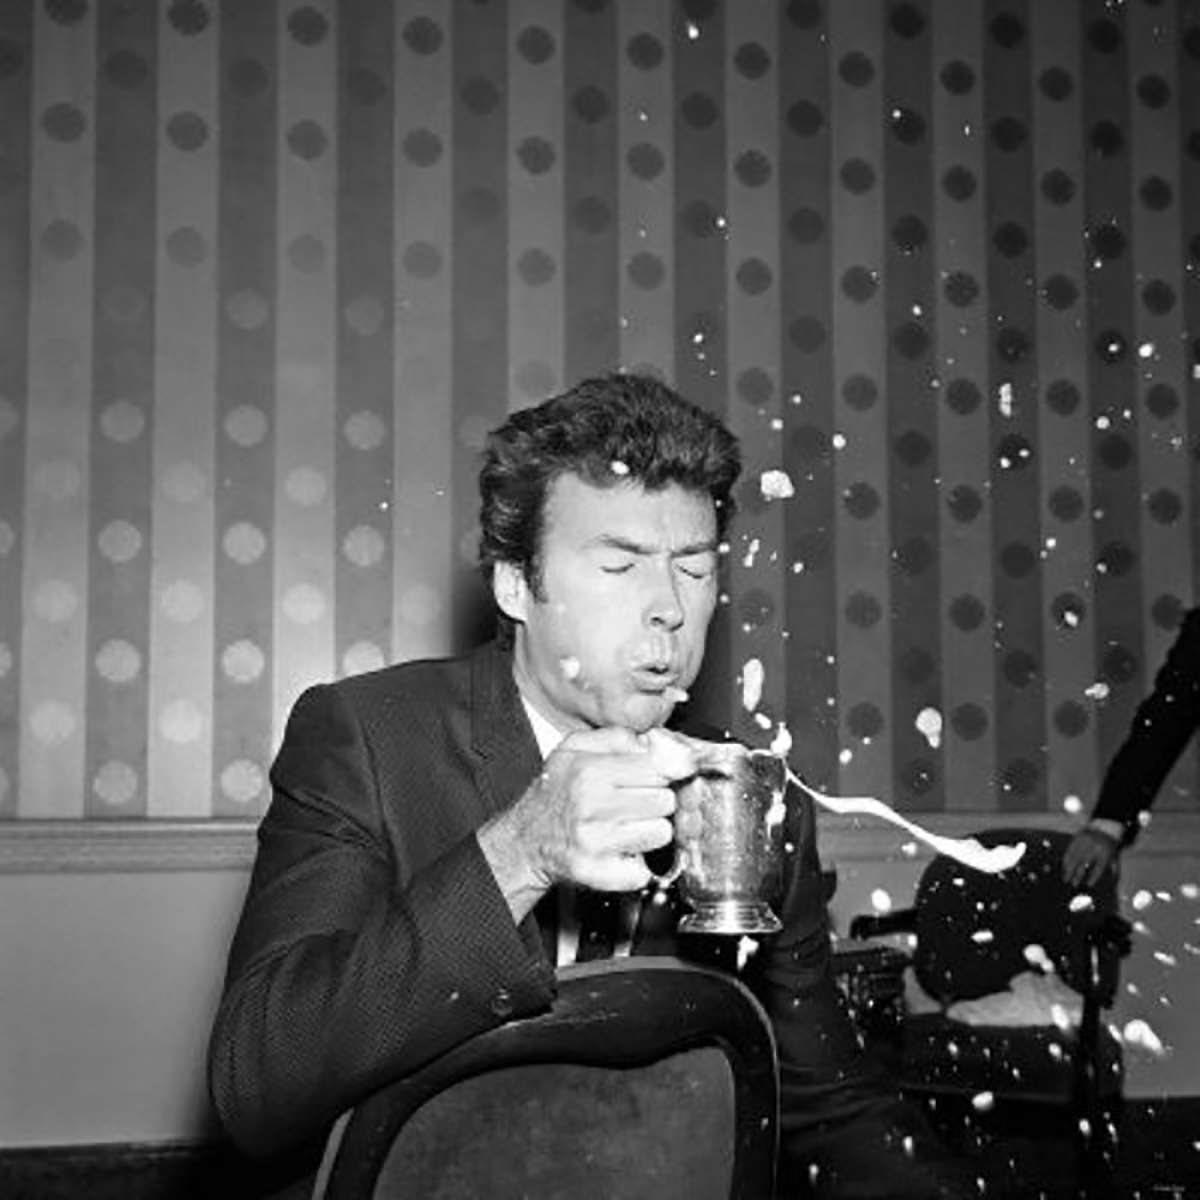 Clint Eastwood blowing the foam off his beer all over, early 1960s.